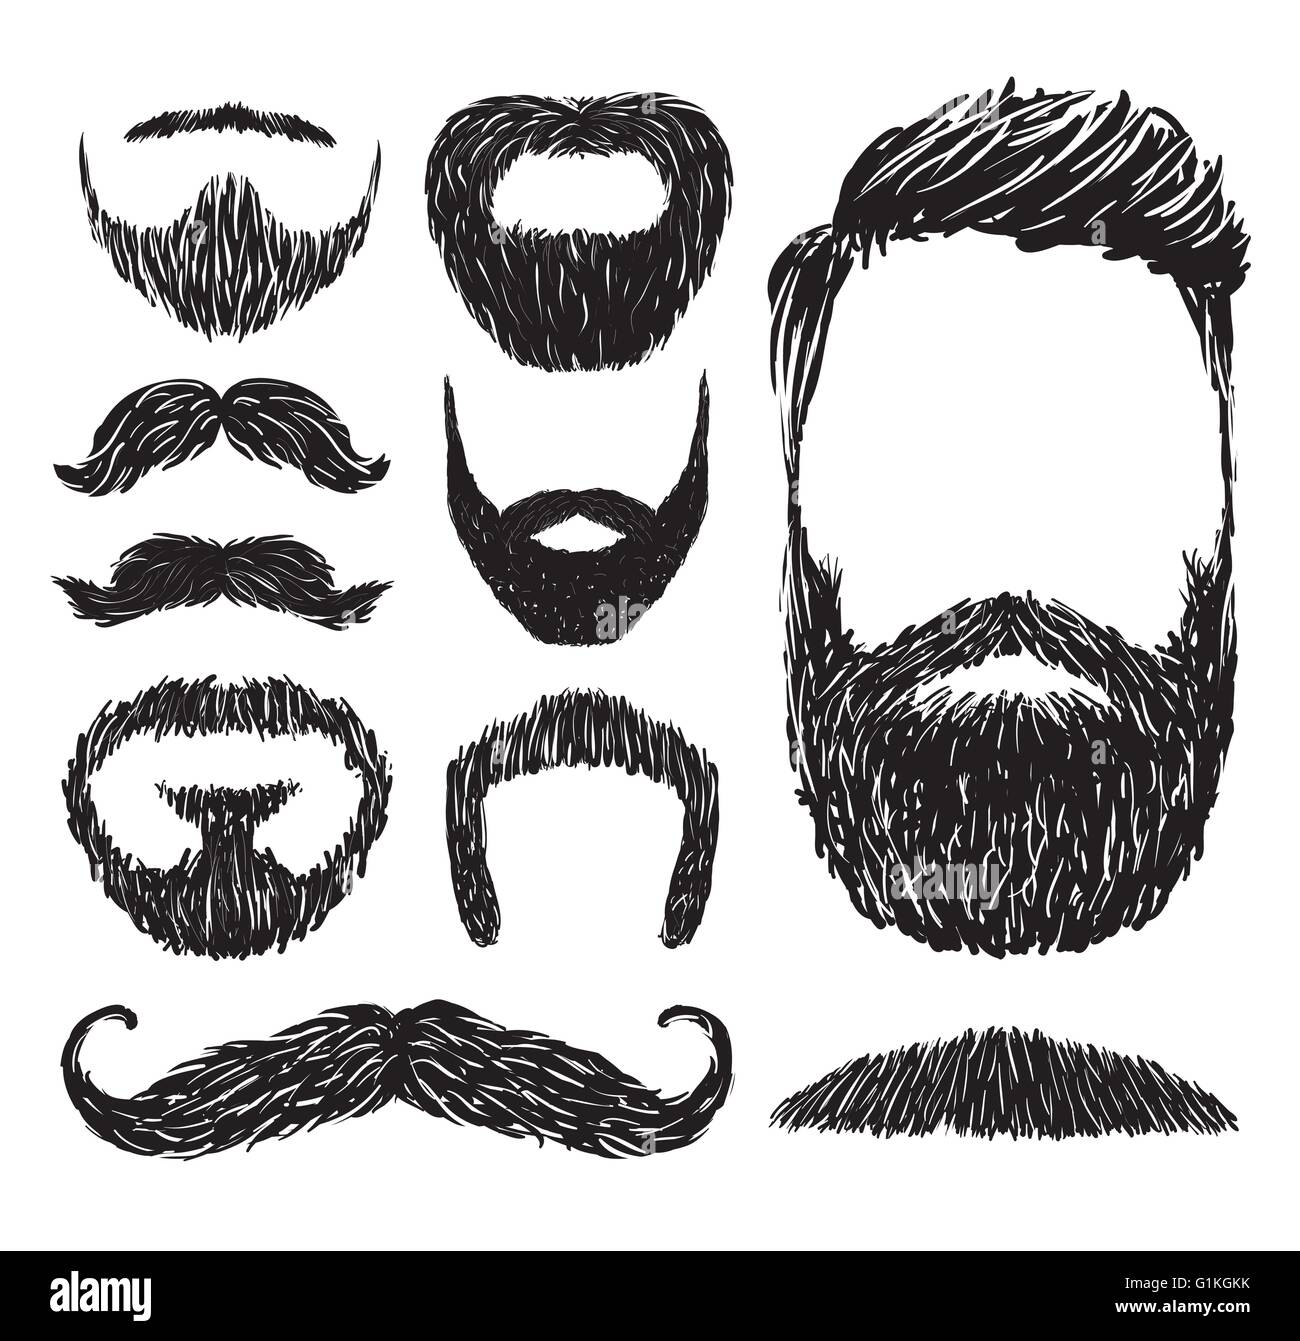 Set of mustache and beard silhouettes, vector illustration Stock Vector